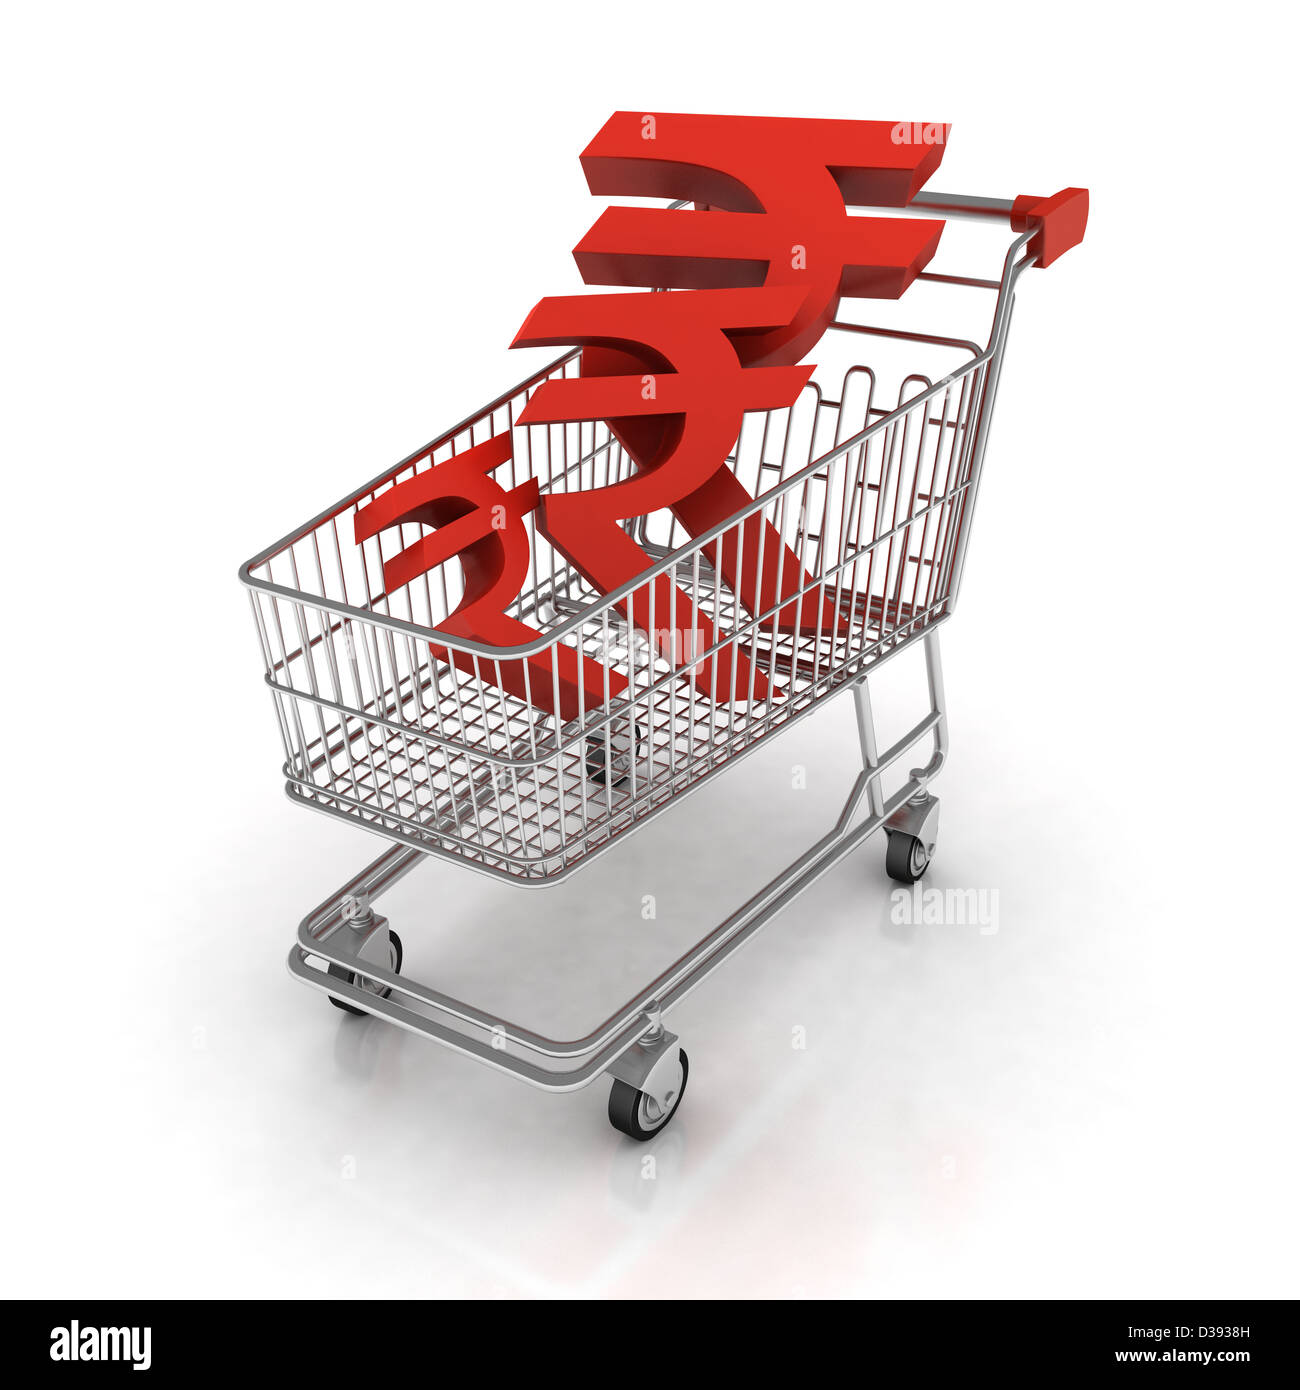 Shopping cart filled with Indian rupee symbols Stock Photo